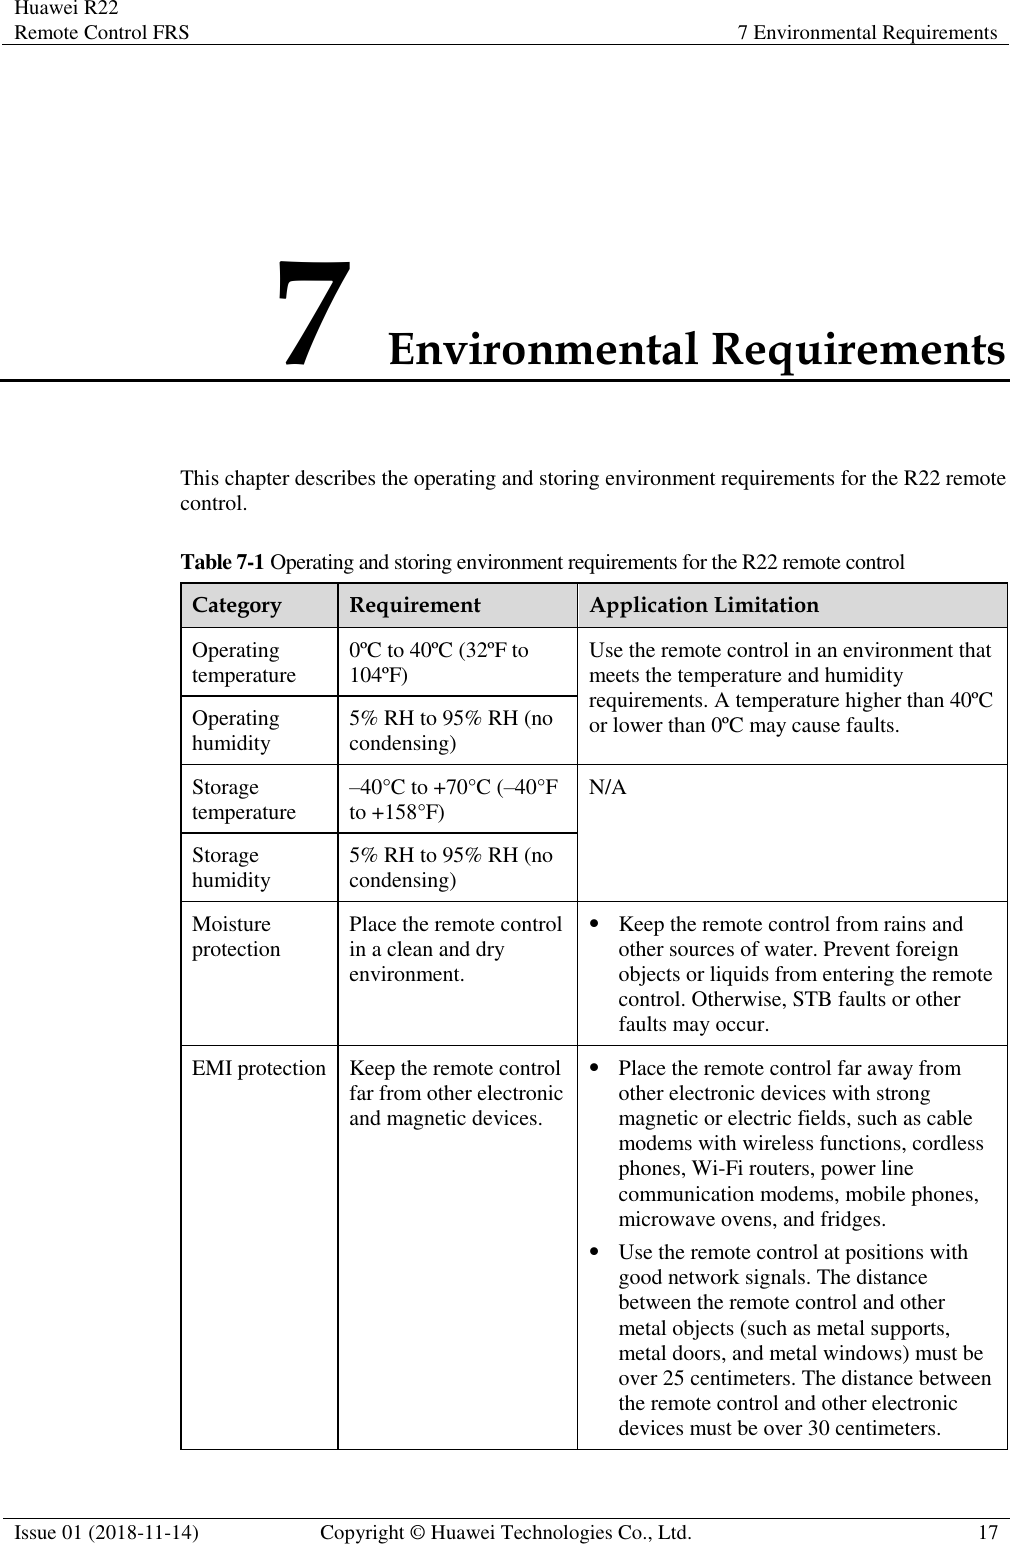 Huawei R22 Remote Control FRS 7 Environmental Requirements  Issue 01 (2018-11-14) Copyright © Huawei Technologies Co., Ltd. 17  7 Environmental Requirements This chapter describes the operating and storing environment requirements for the R22 remote control. Table 7-1 Operating and storing environment requirements for the R22 remote control Category Requirement Application Limitation Operating temperature 0ºC to 40ºC (32ºF to 104ºF) Use the remote control in an environment that meets the temperature and humidity requirements. A temperature higher than 40ºC or lower than 0ºC may cause faults. Operating humidity 5% RH to 95% RH (no condensing) Storage temperature –40°C to +70°C (–40°F to +158°F) N/A Storage humidity 5% RH to 95% RH (no condensing) Moisture protection Place the remote control in a clean and dry environment. ⚫ Keep the remote control from rains and other sources of water. Prevent foreign objects or liquids from entering the remote control. Otherwise, STB faults or other faults may occur. EMI protection Keep the remote control far from other electronic and magnetic devices. ⚫ Place the remote control far away from other electronic devices with strong magnetic or electric fields, such as cable modems with wireless functions, cordless phones, Wi-Fi routers, power line communication modems, mobile phones, microwave ovens, and fridges. ⚫ Use the remote control at positions with good network signals. The distance between the remote control and other metal objects (such as metal supports, metal doors, and metal windows) must be over 25 centimeters. The distance between the remote control and other electronic devices must be over 30 centimeters. 